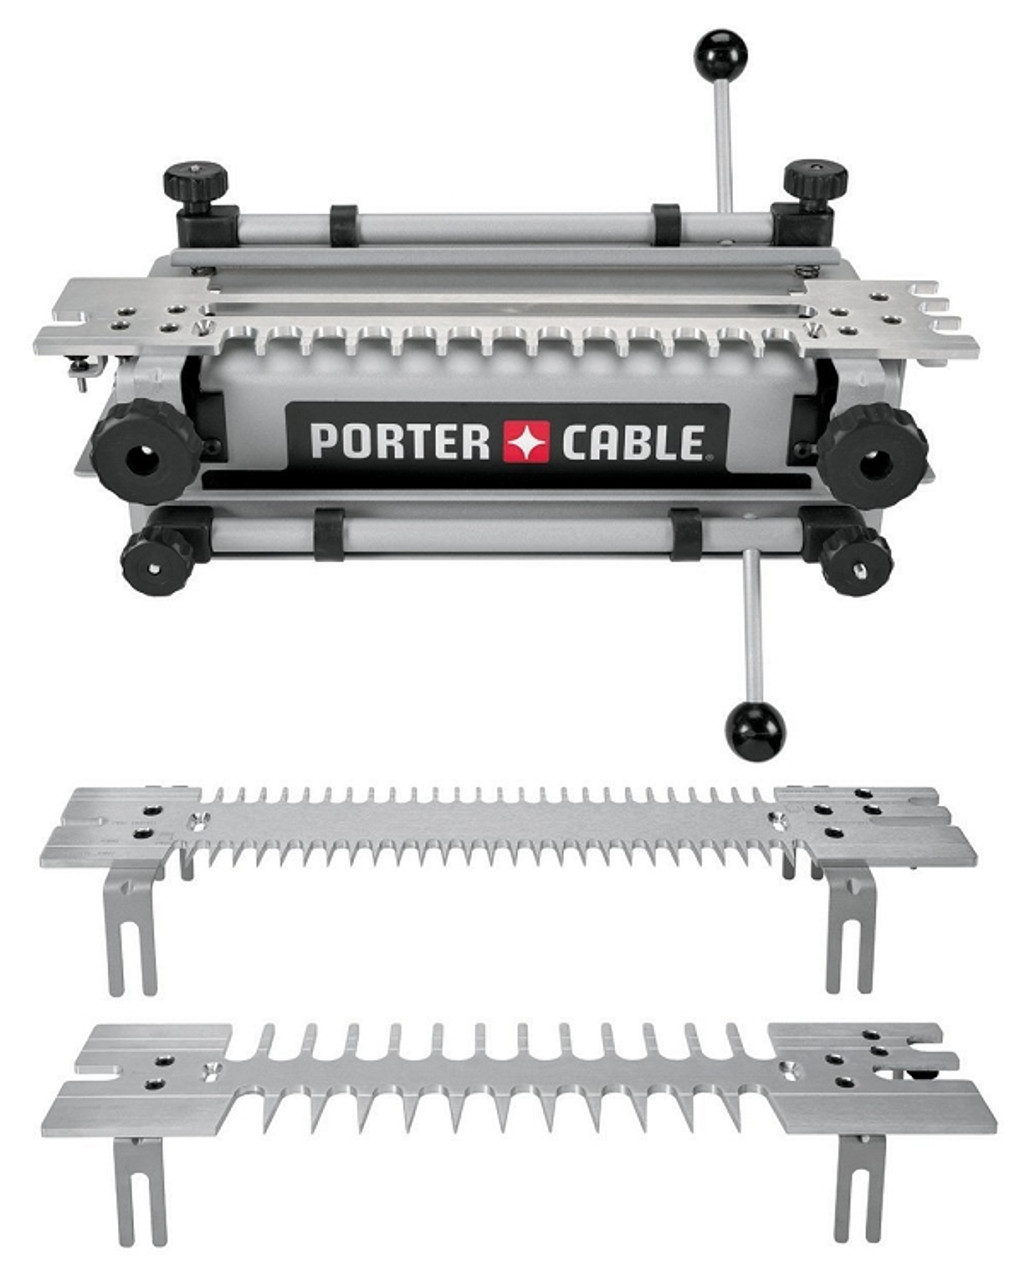 Porter Cable 4216 12 Deluxe Dovetail Jig Combination Kit